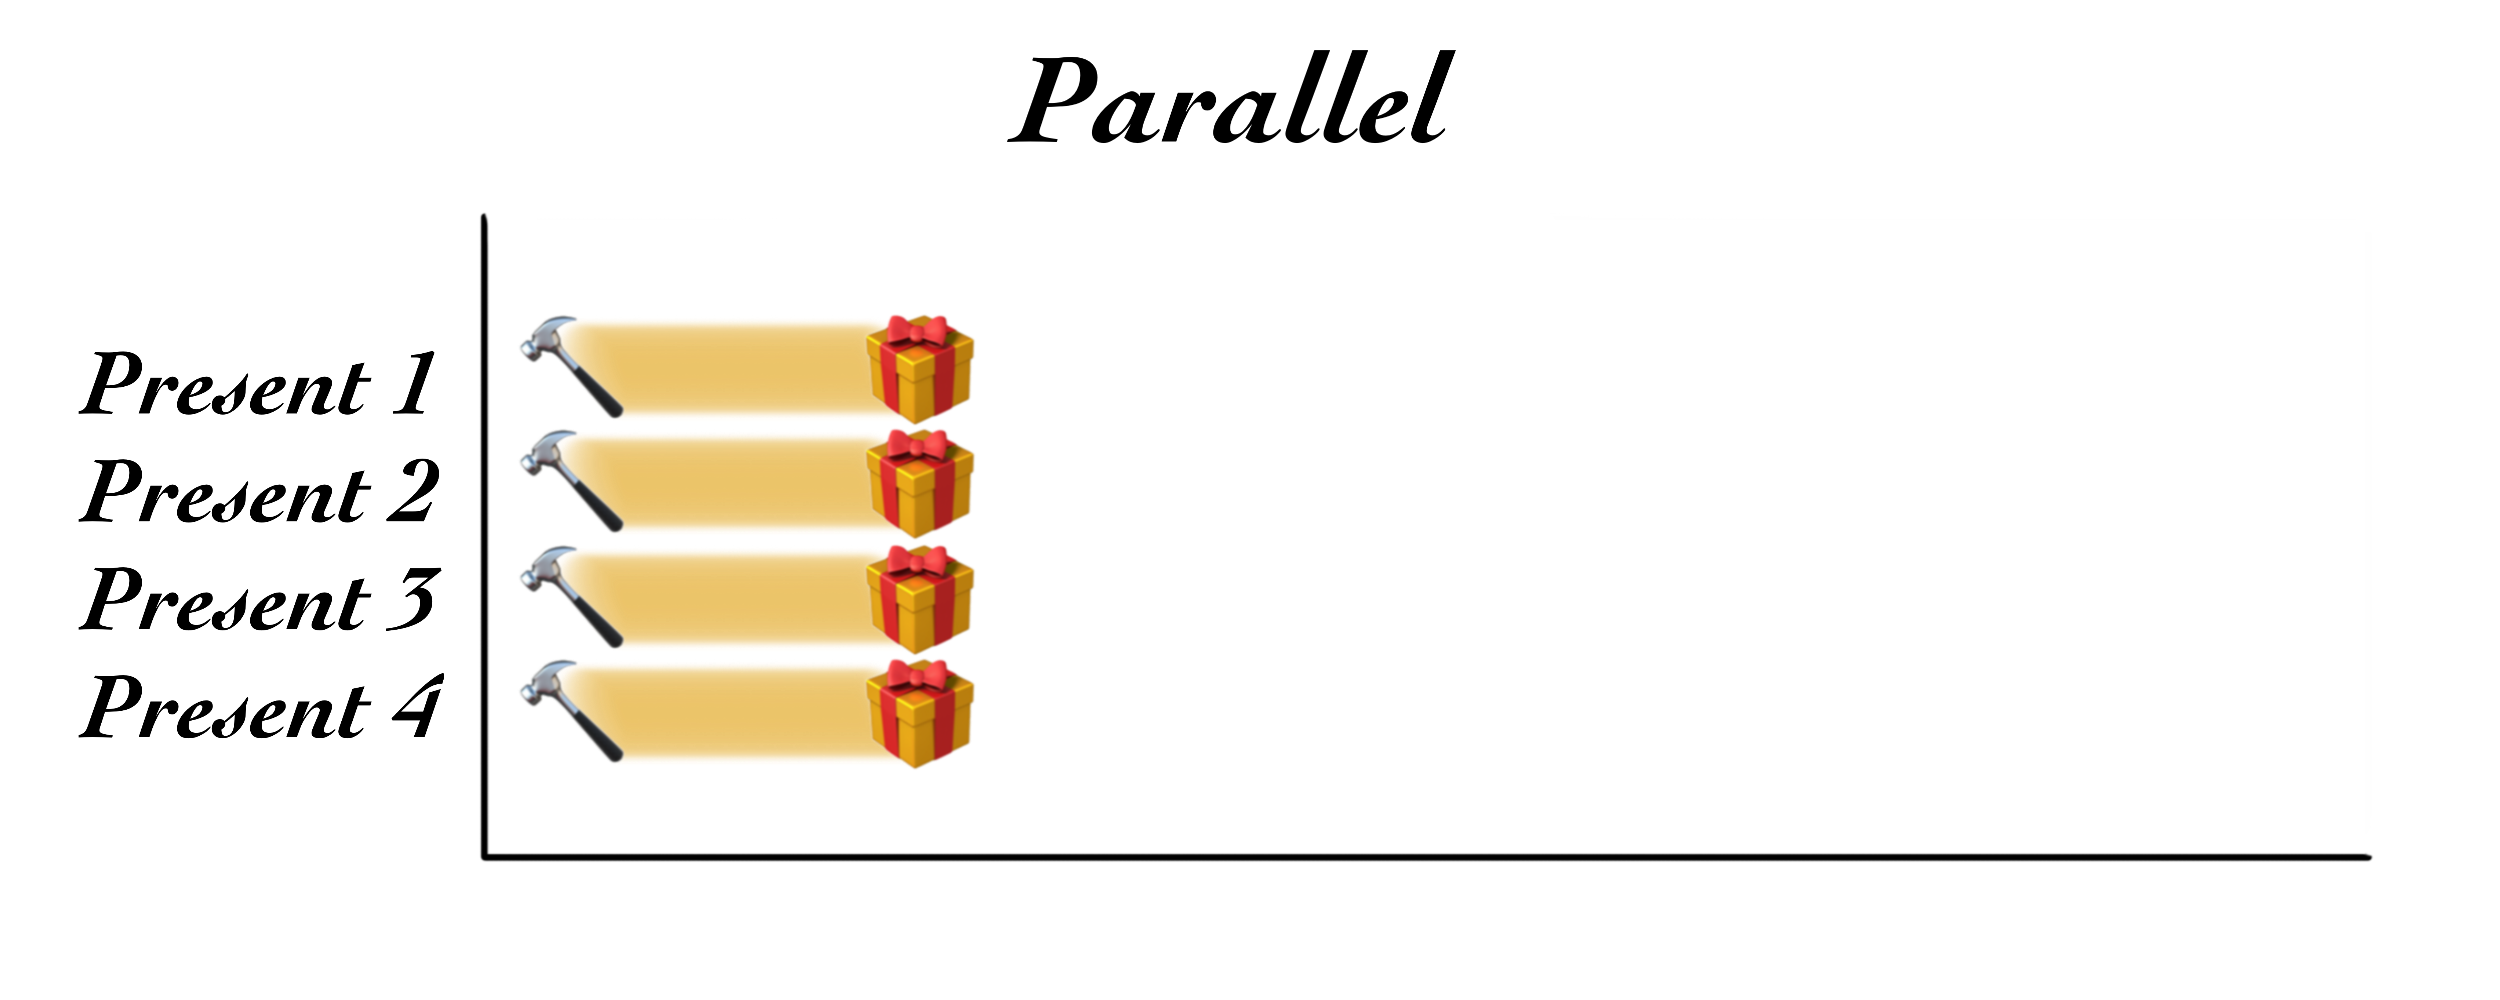 Illustration of parallel processes